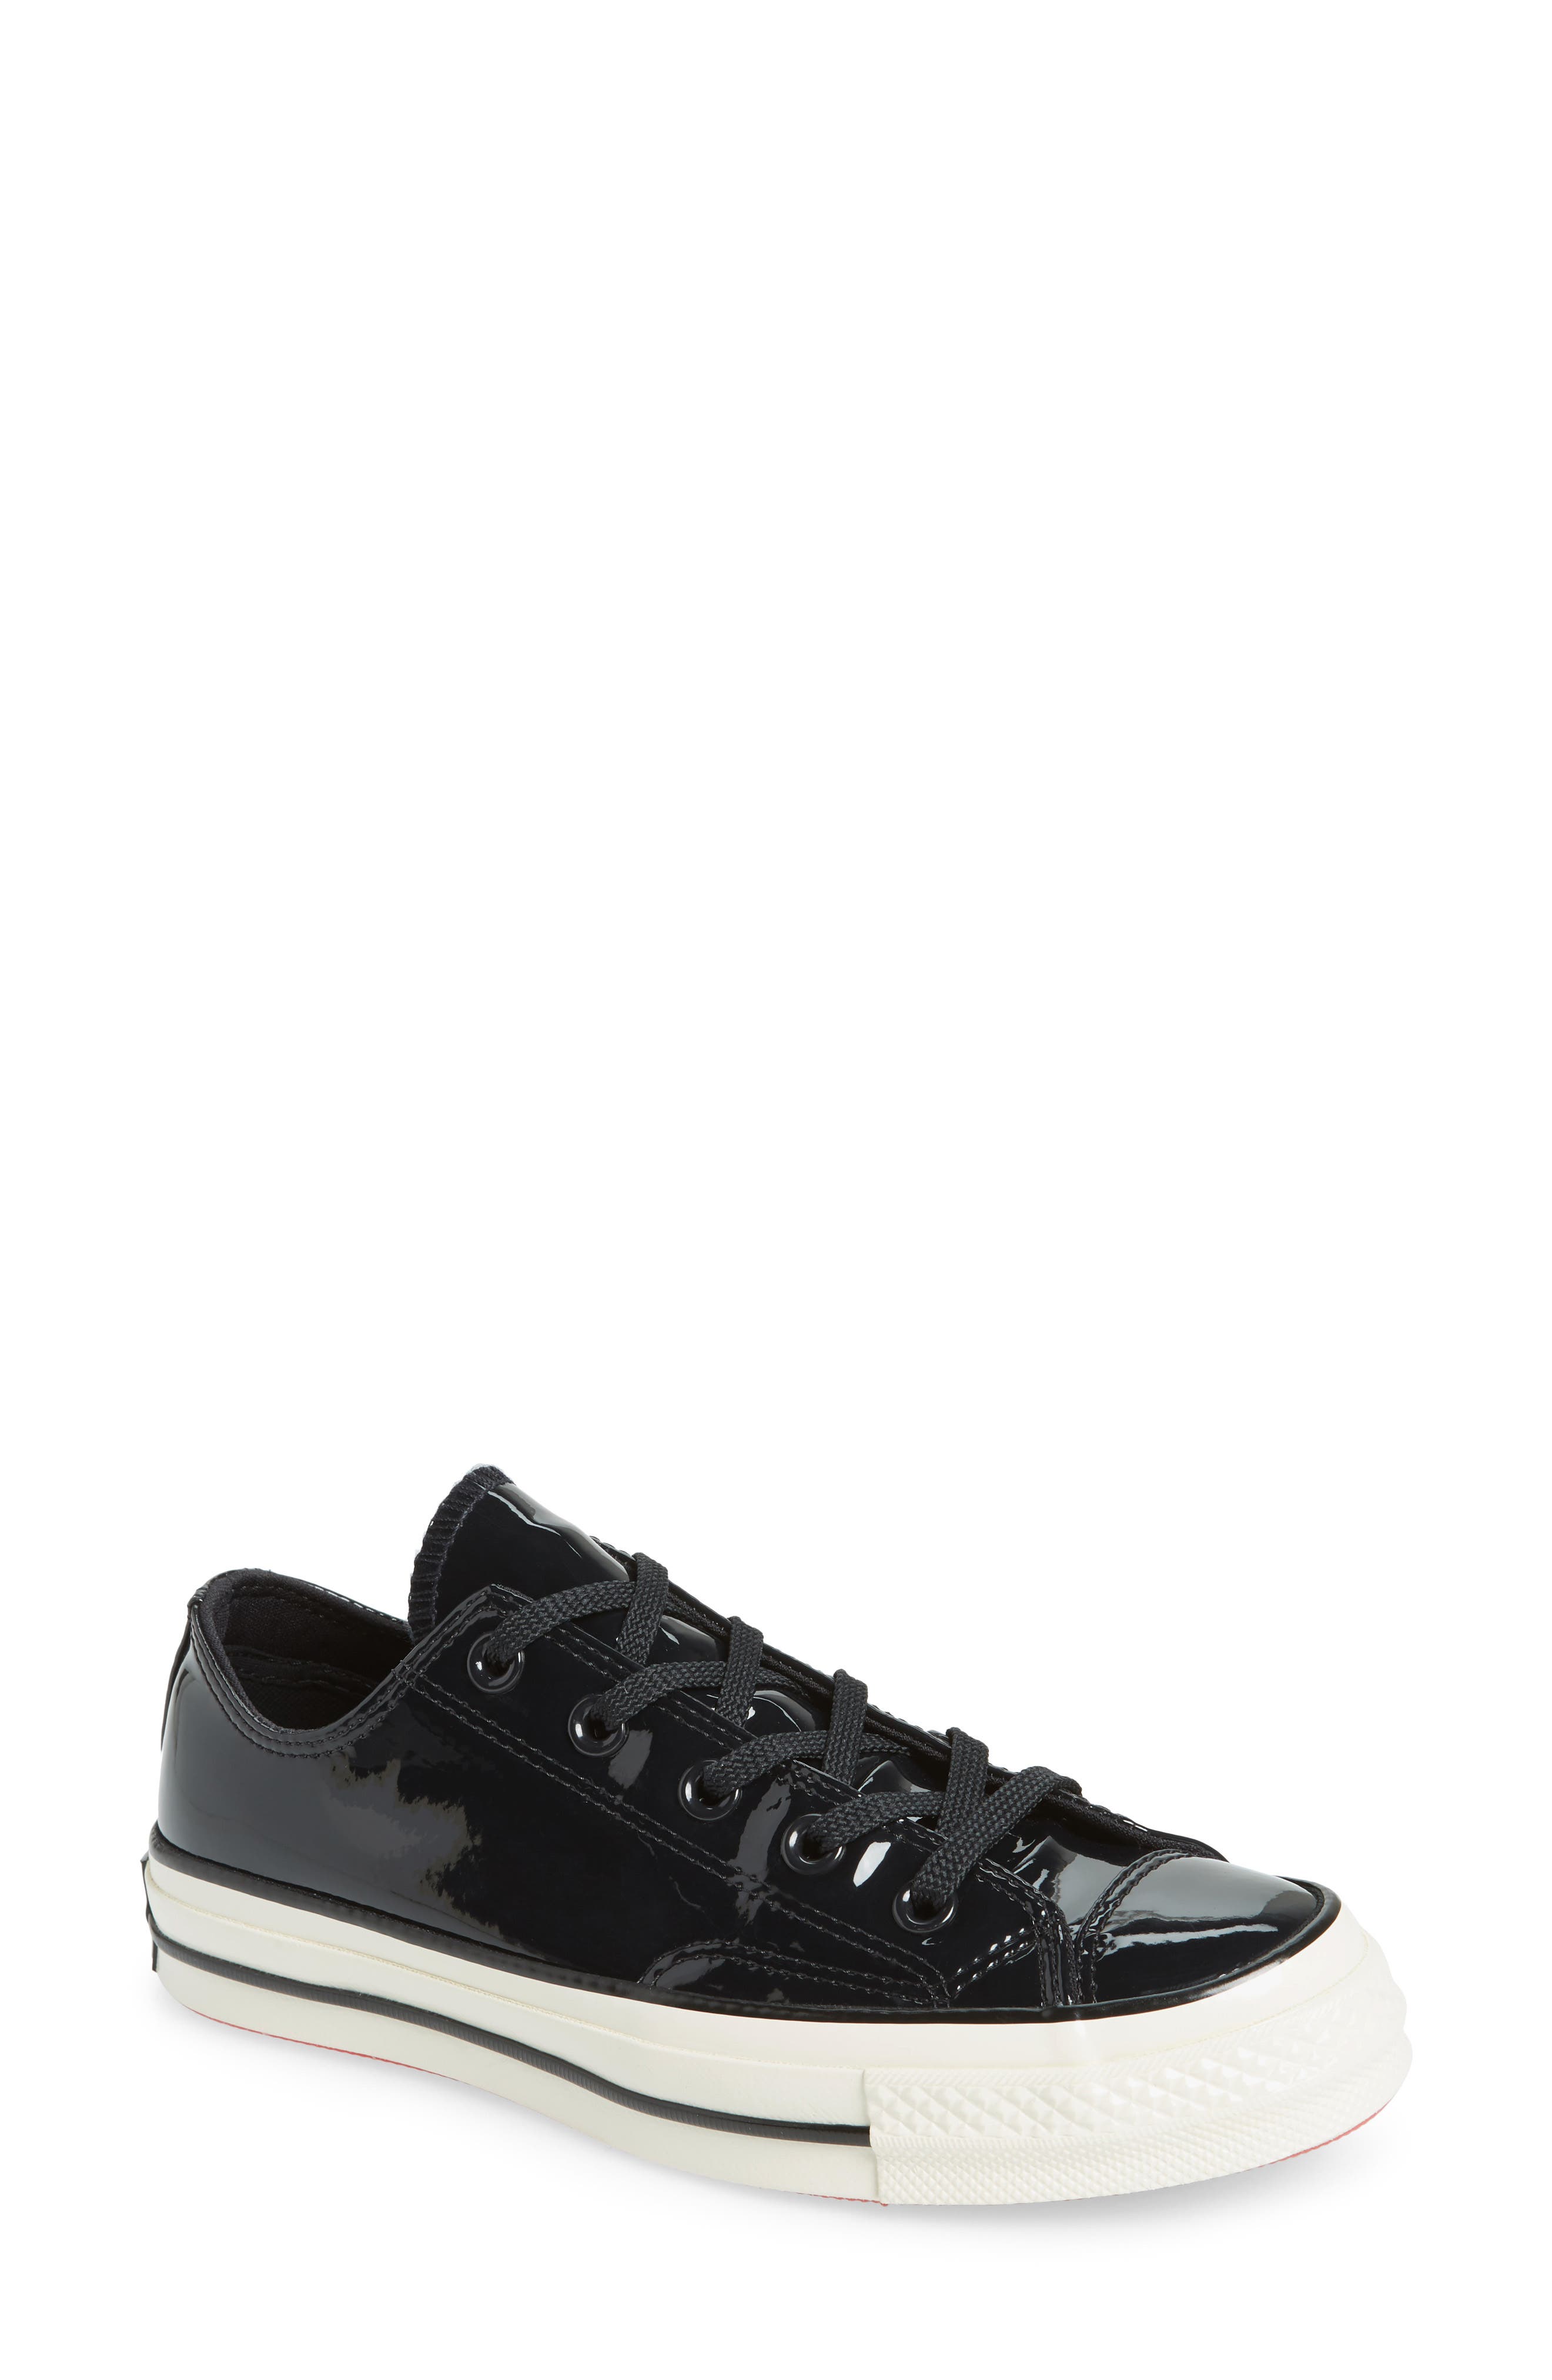 converse patent leather sneakers